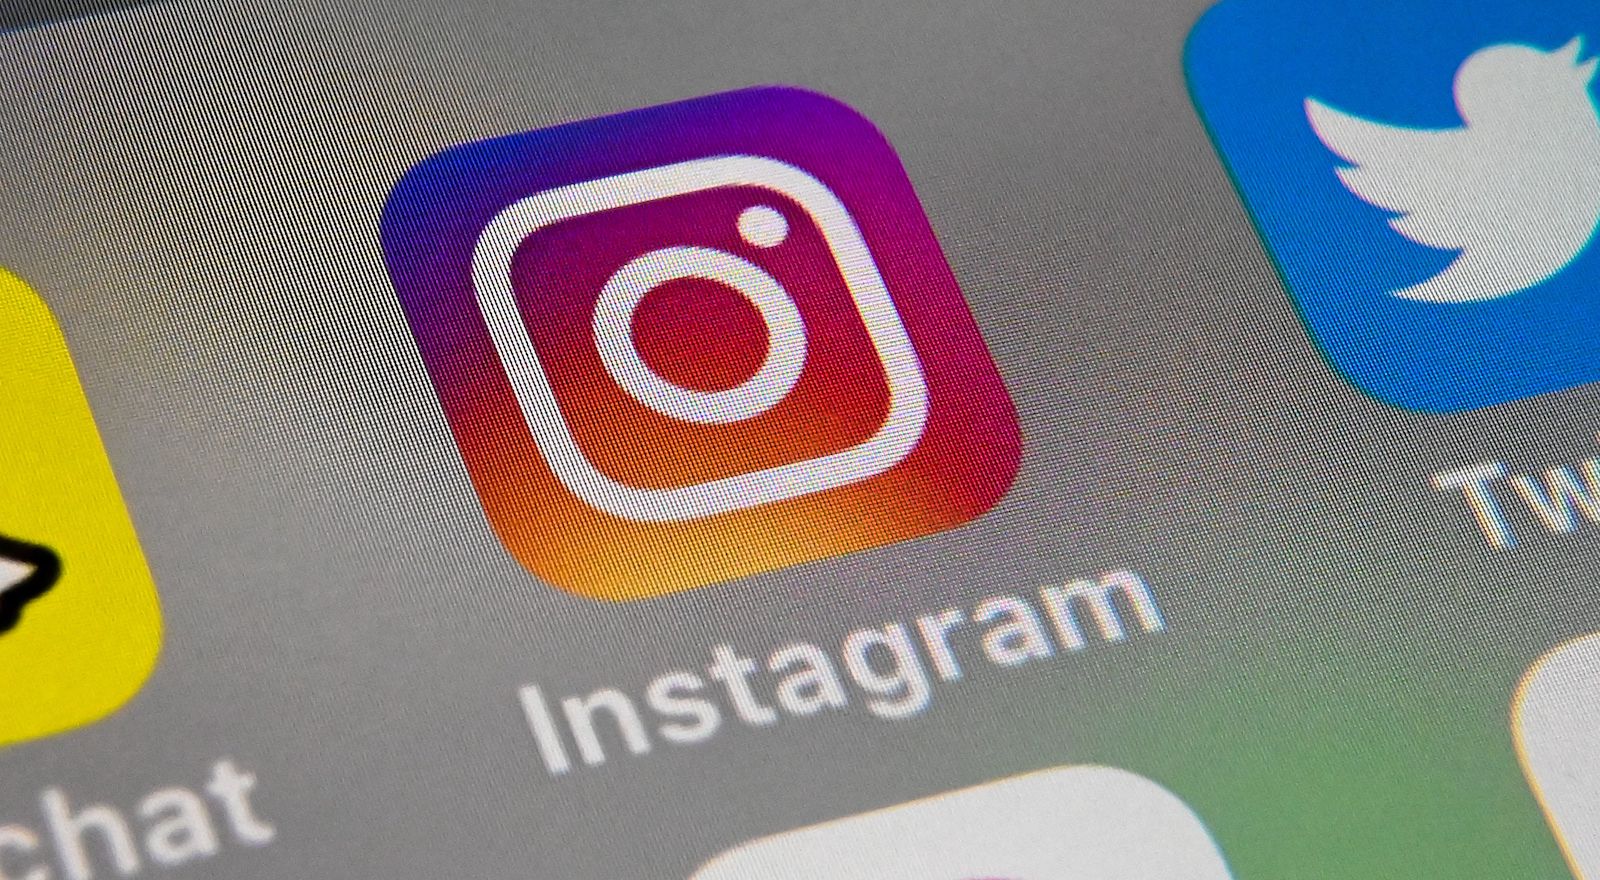 A picture taken on October 1, 2019 in Lille shows the logo of mobile app Instagram displayed on a tablet. (Photo by DENIS CHARLET / AFP) (Photo by DENIS CHARLET/AFP via Getty Images)